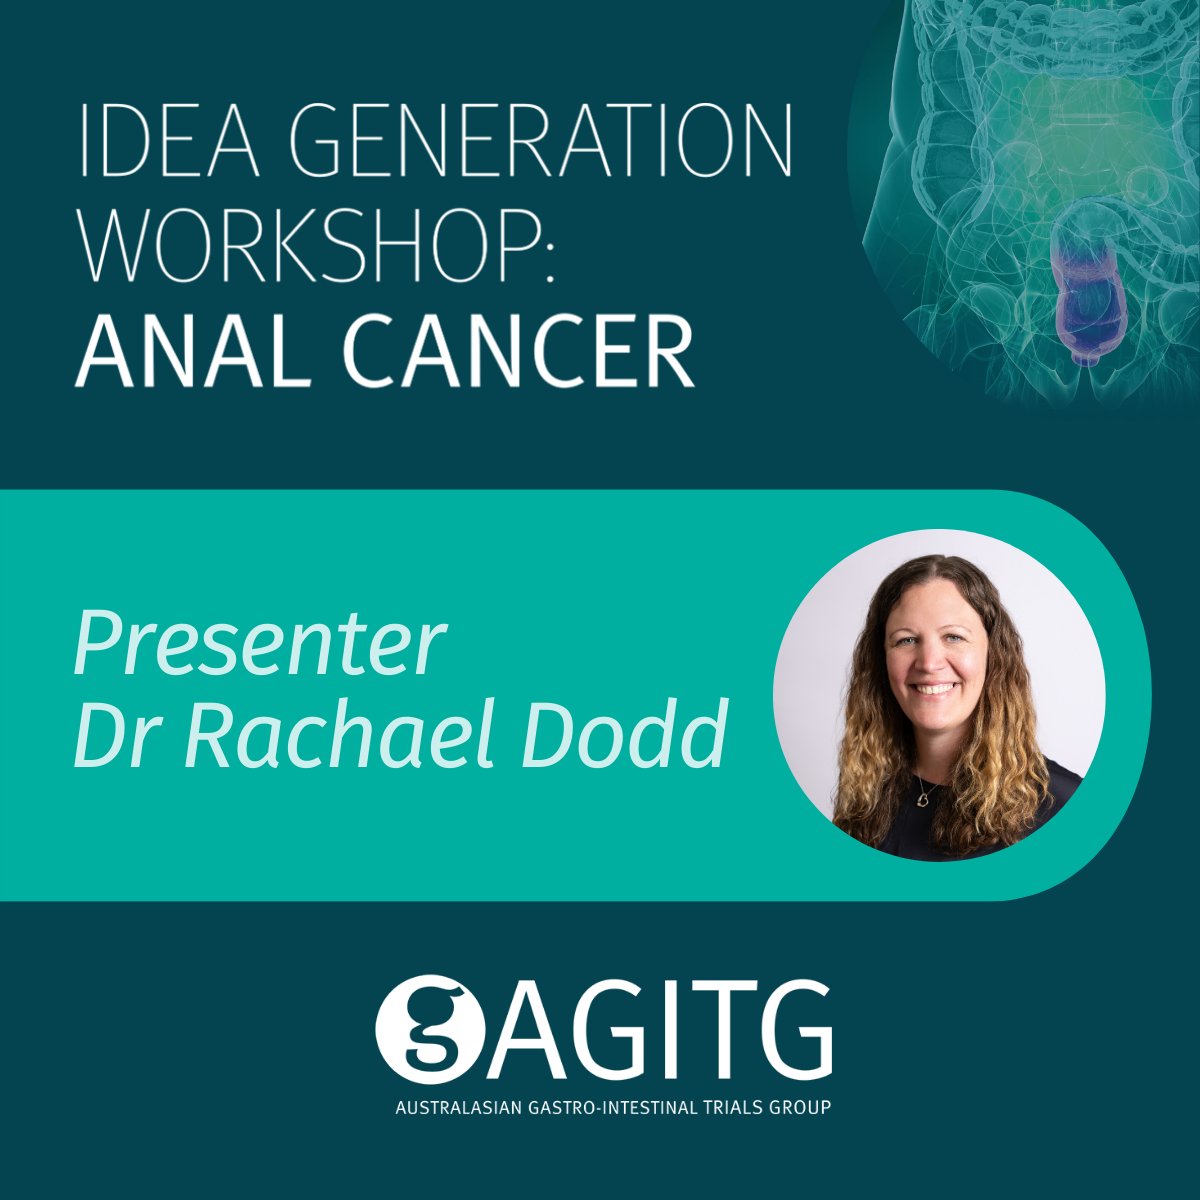 First to present is Dr @RachaelHDodd from the @DaffodilCentre speaking on her idea: 'Adaptation of a HPV education resource'.

#IGW #GICancer